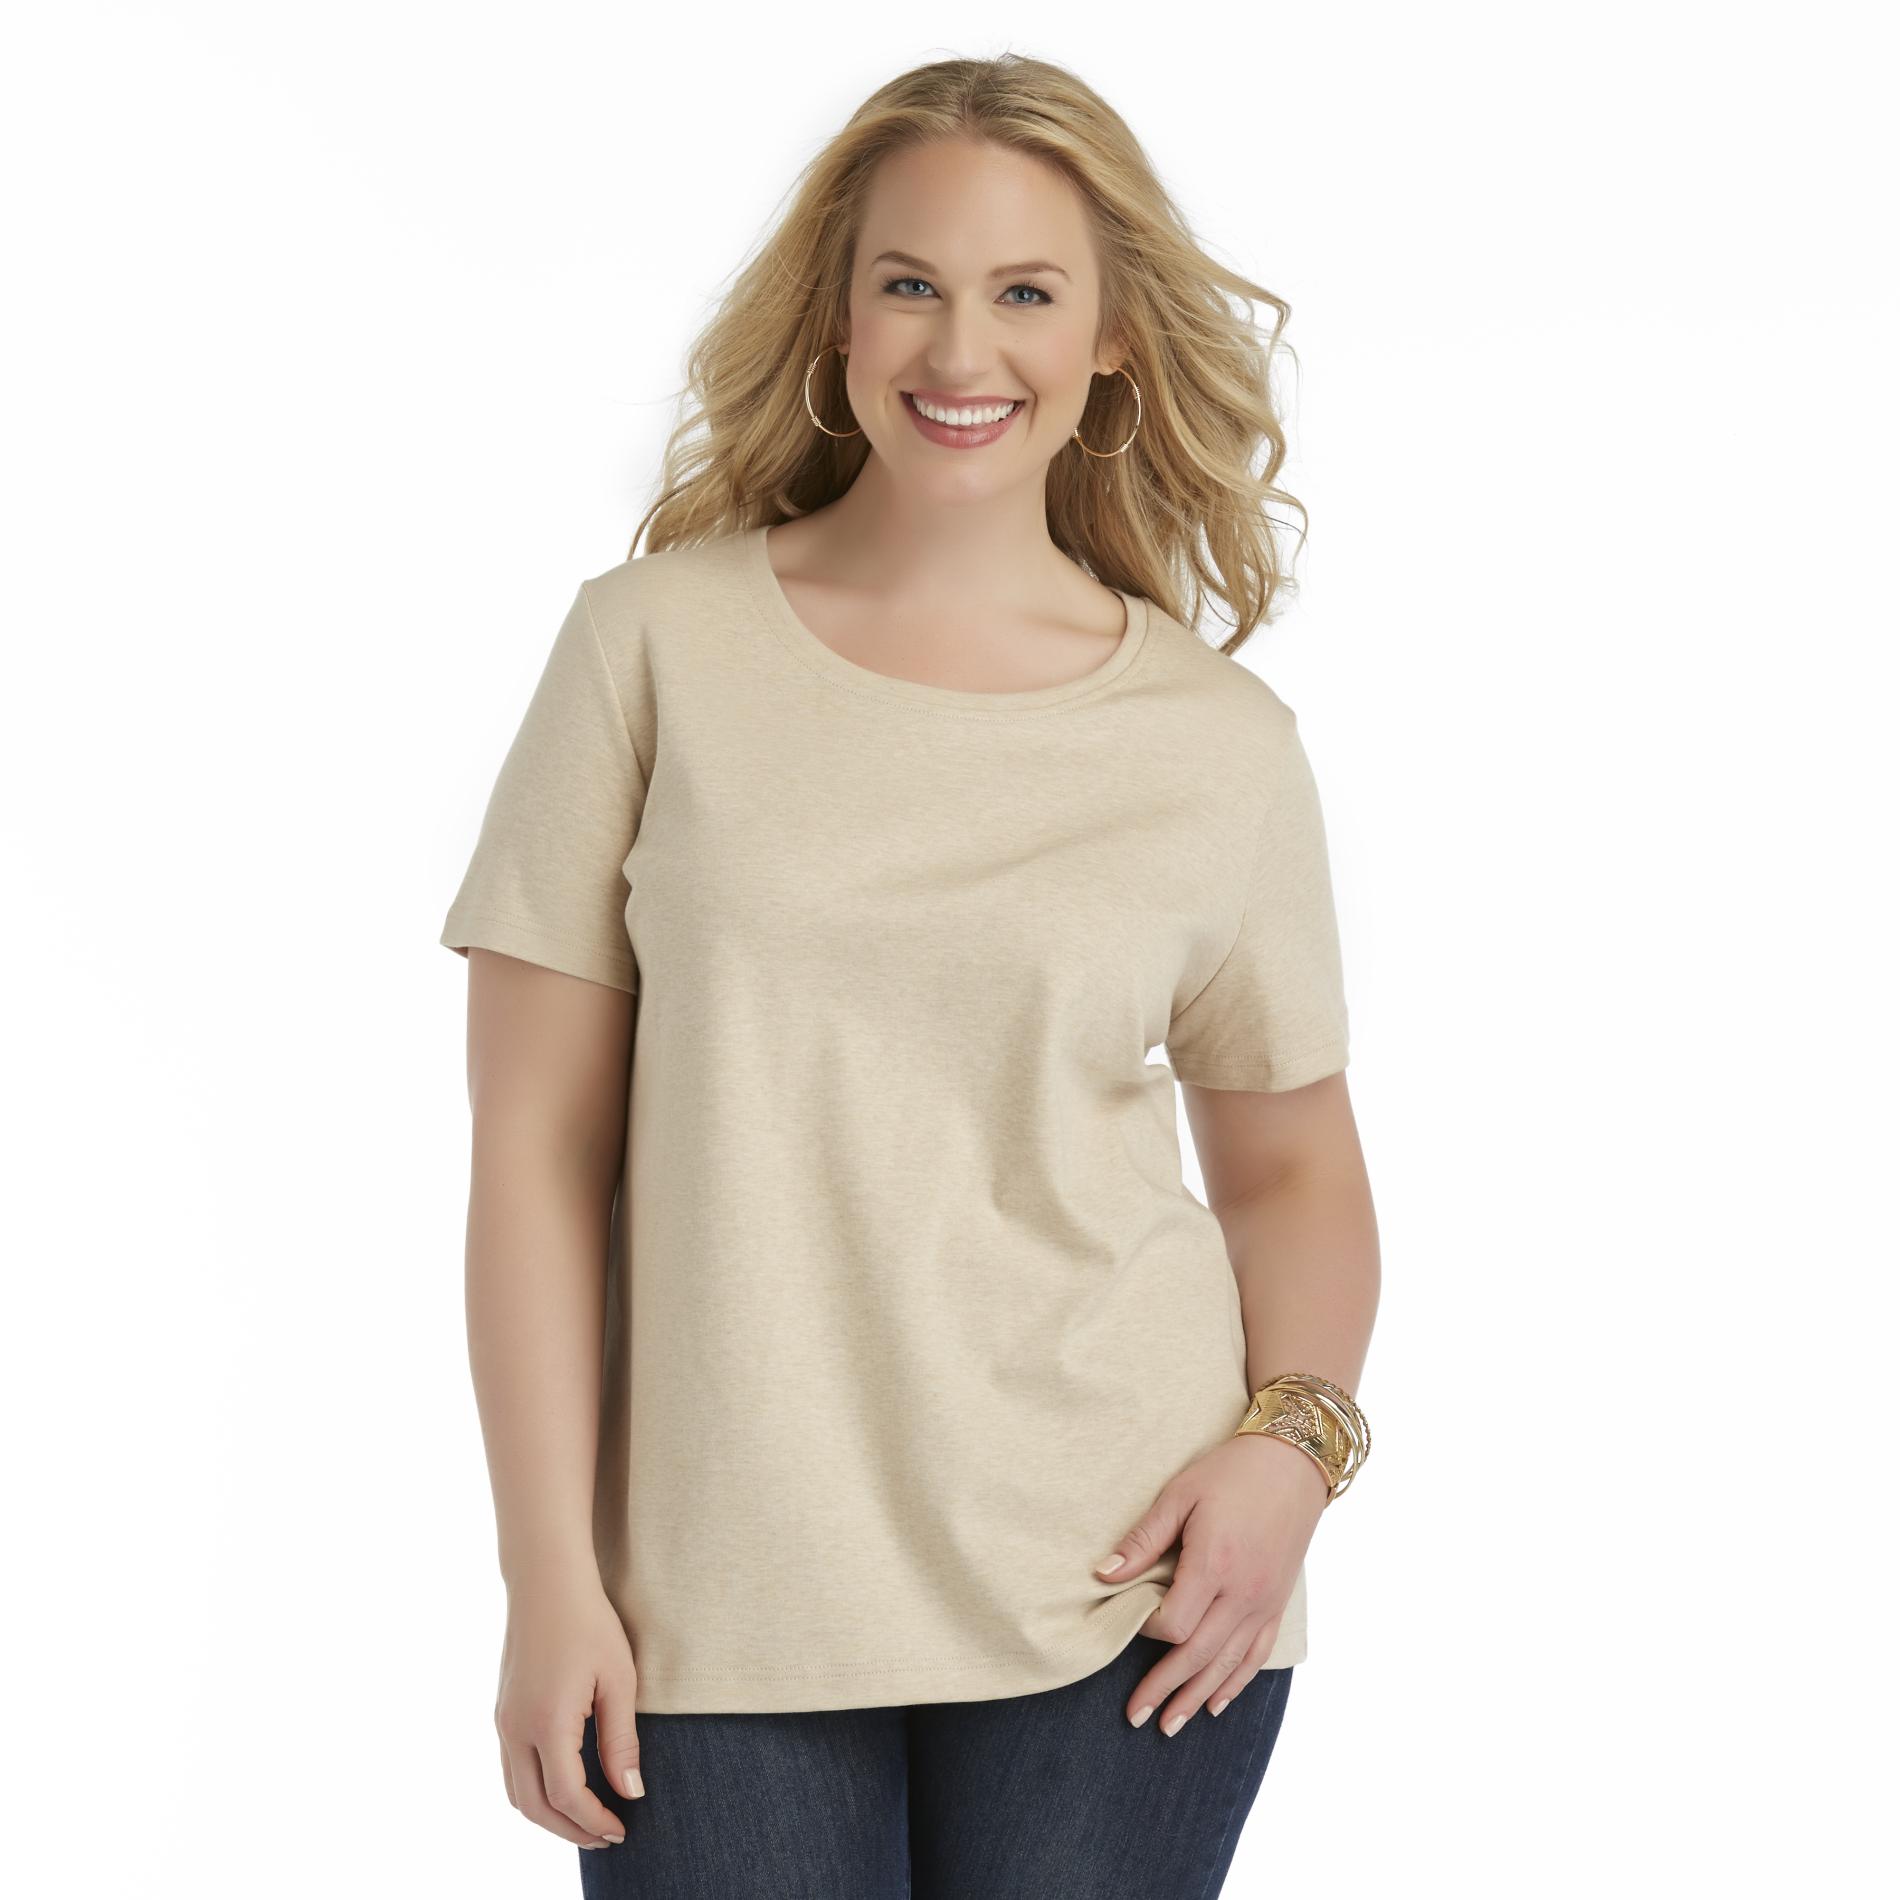 Basic Editions Women's Plus Relaxed-Fit T-Shirt